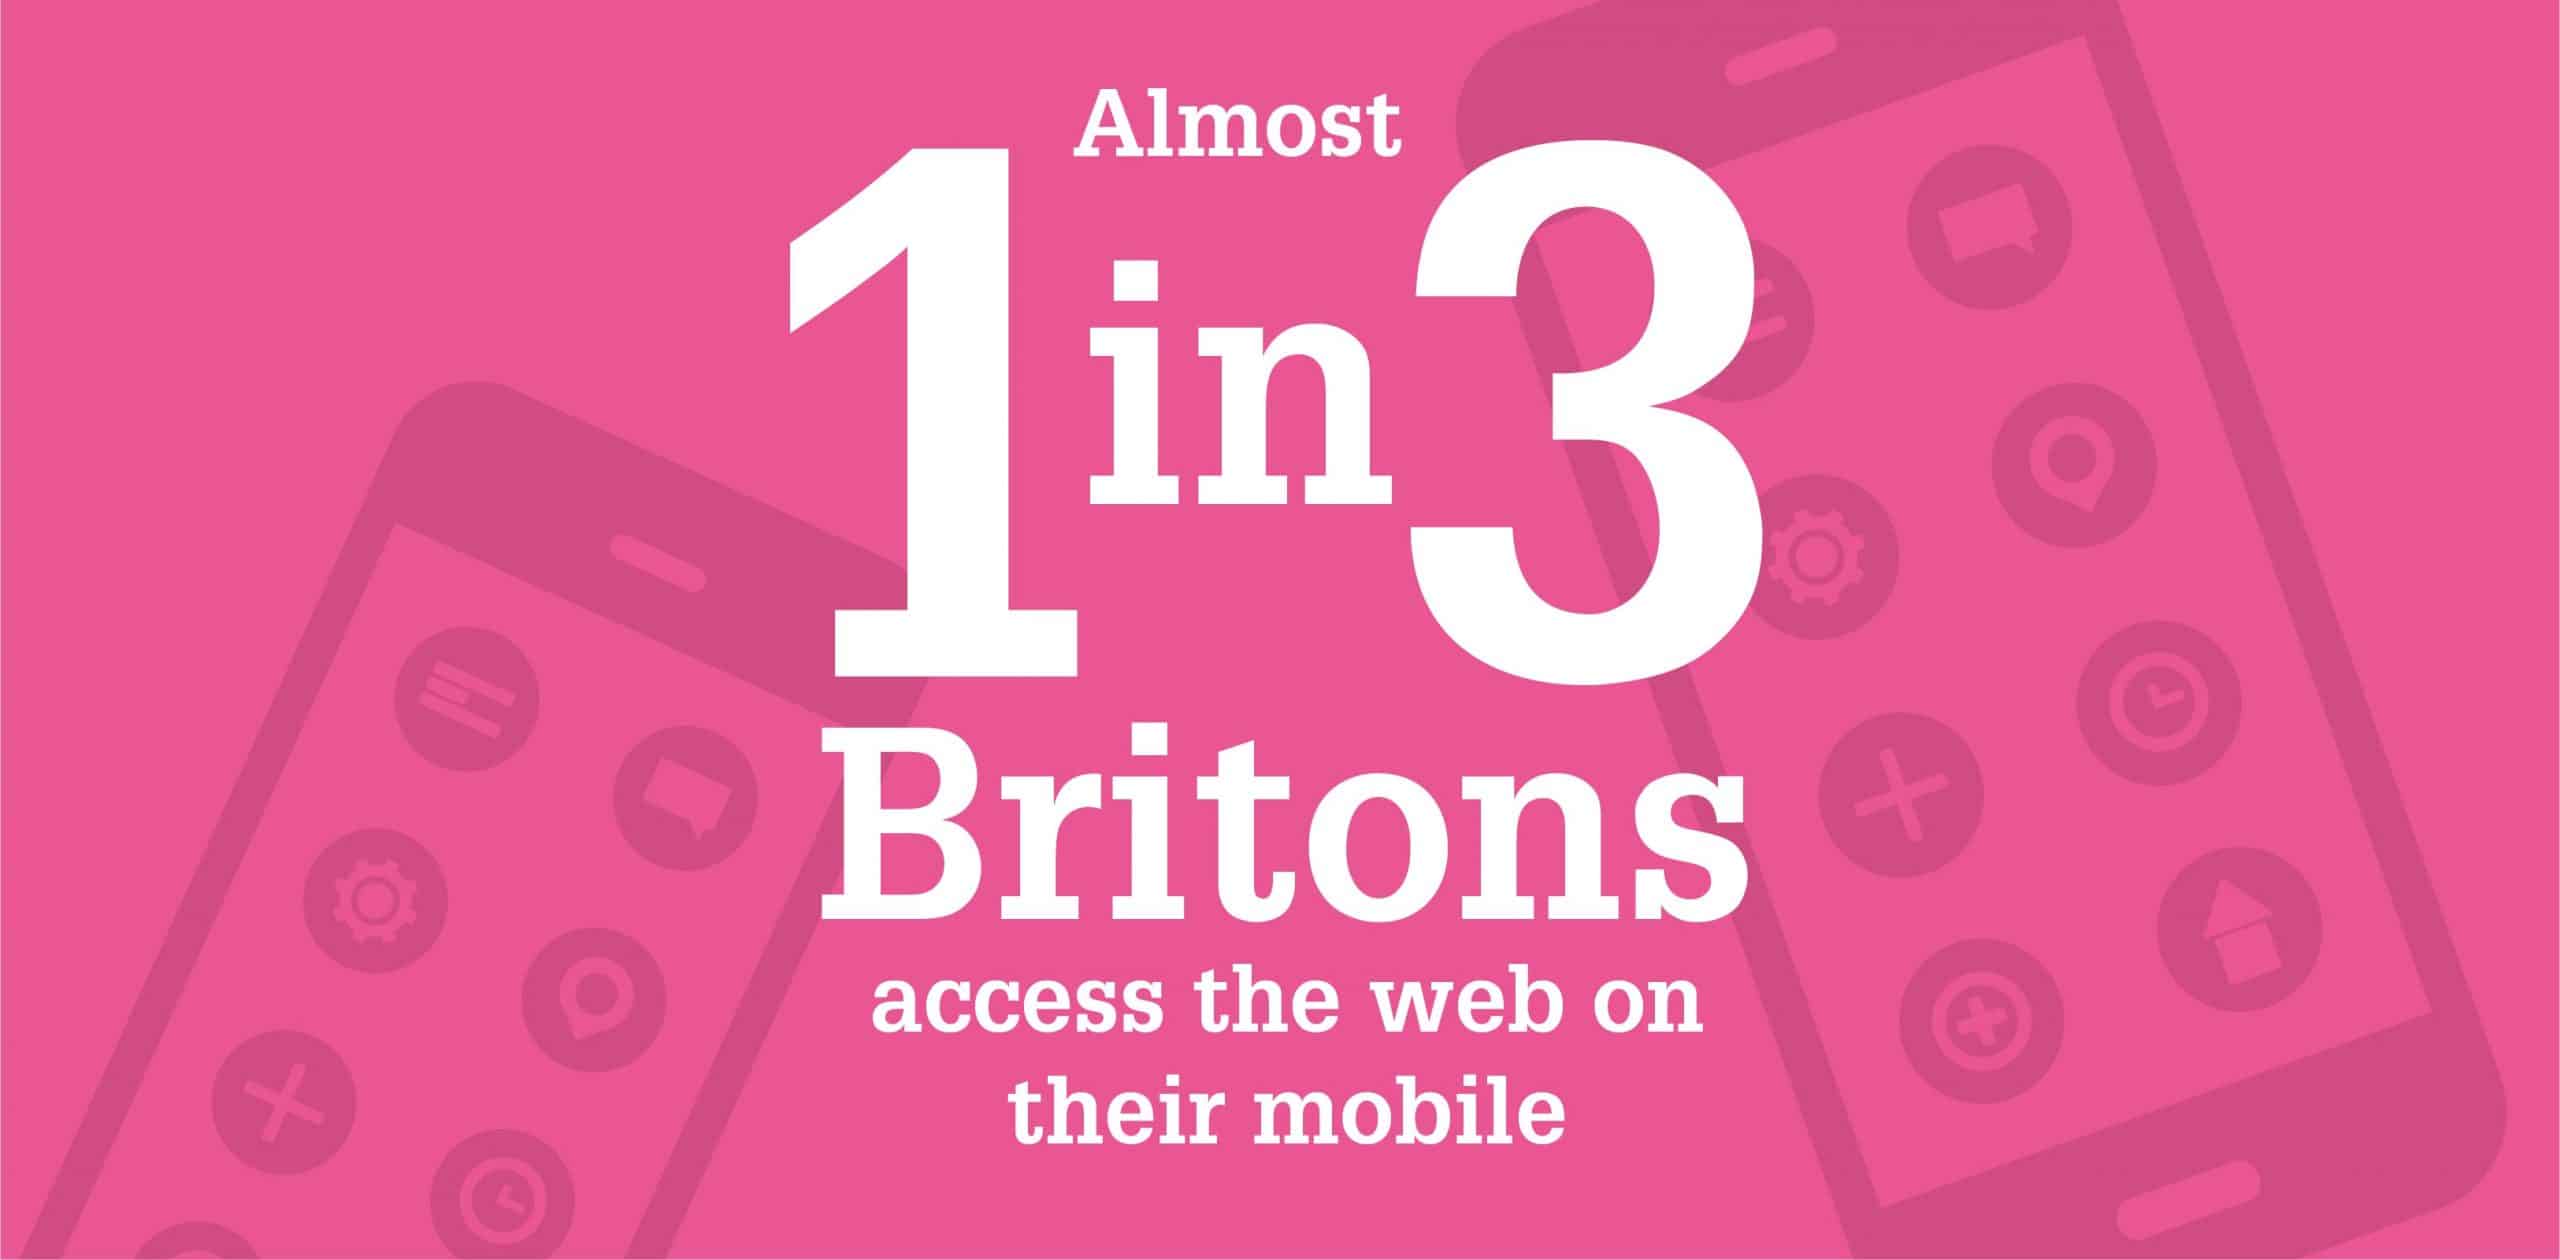 Almost 1 in 3 britons access the web on their mobile